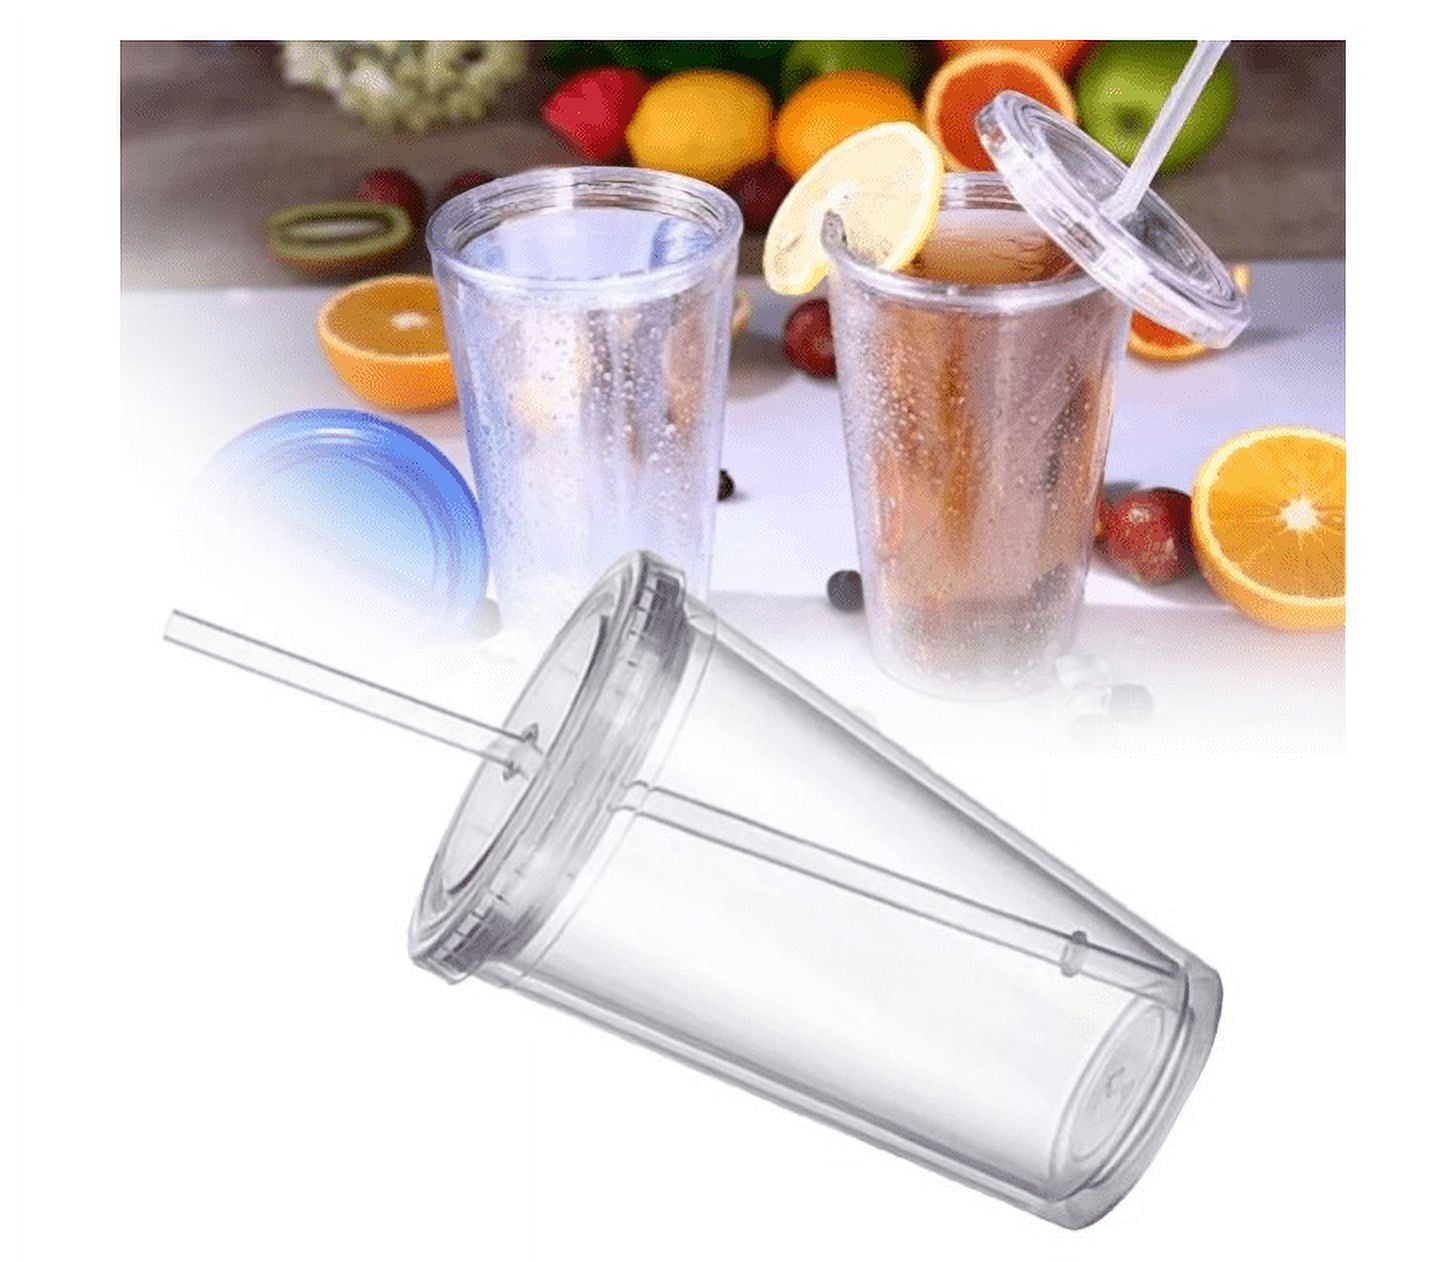 27 Pieces Skinny Tumbler Cups with Lids and Straws, Matte Pastel Colored  Acrylic Tumblers Set, Reusa…See more 27 Pieces Skinny Tumbler Cups with  Lids